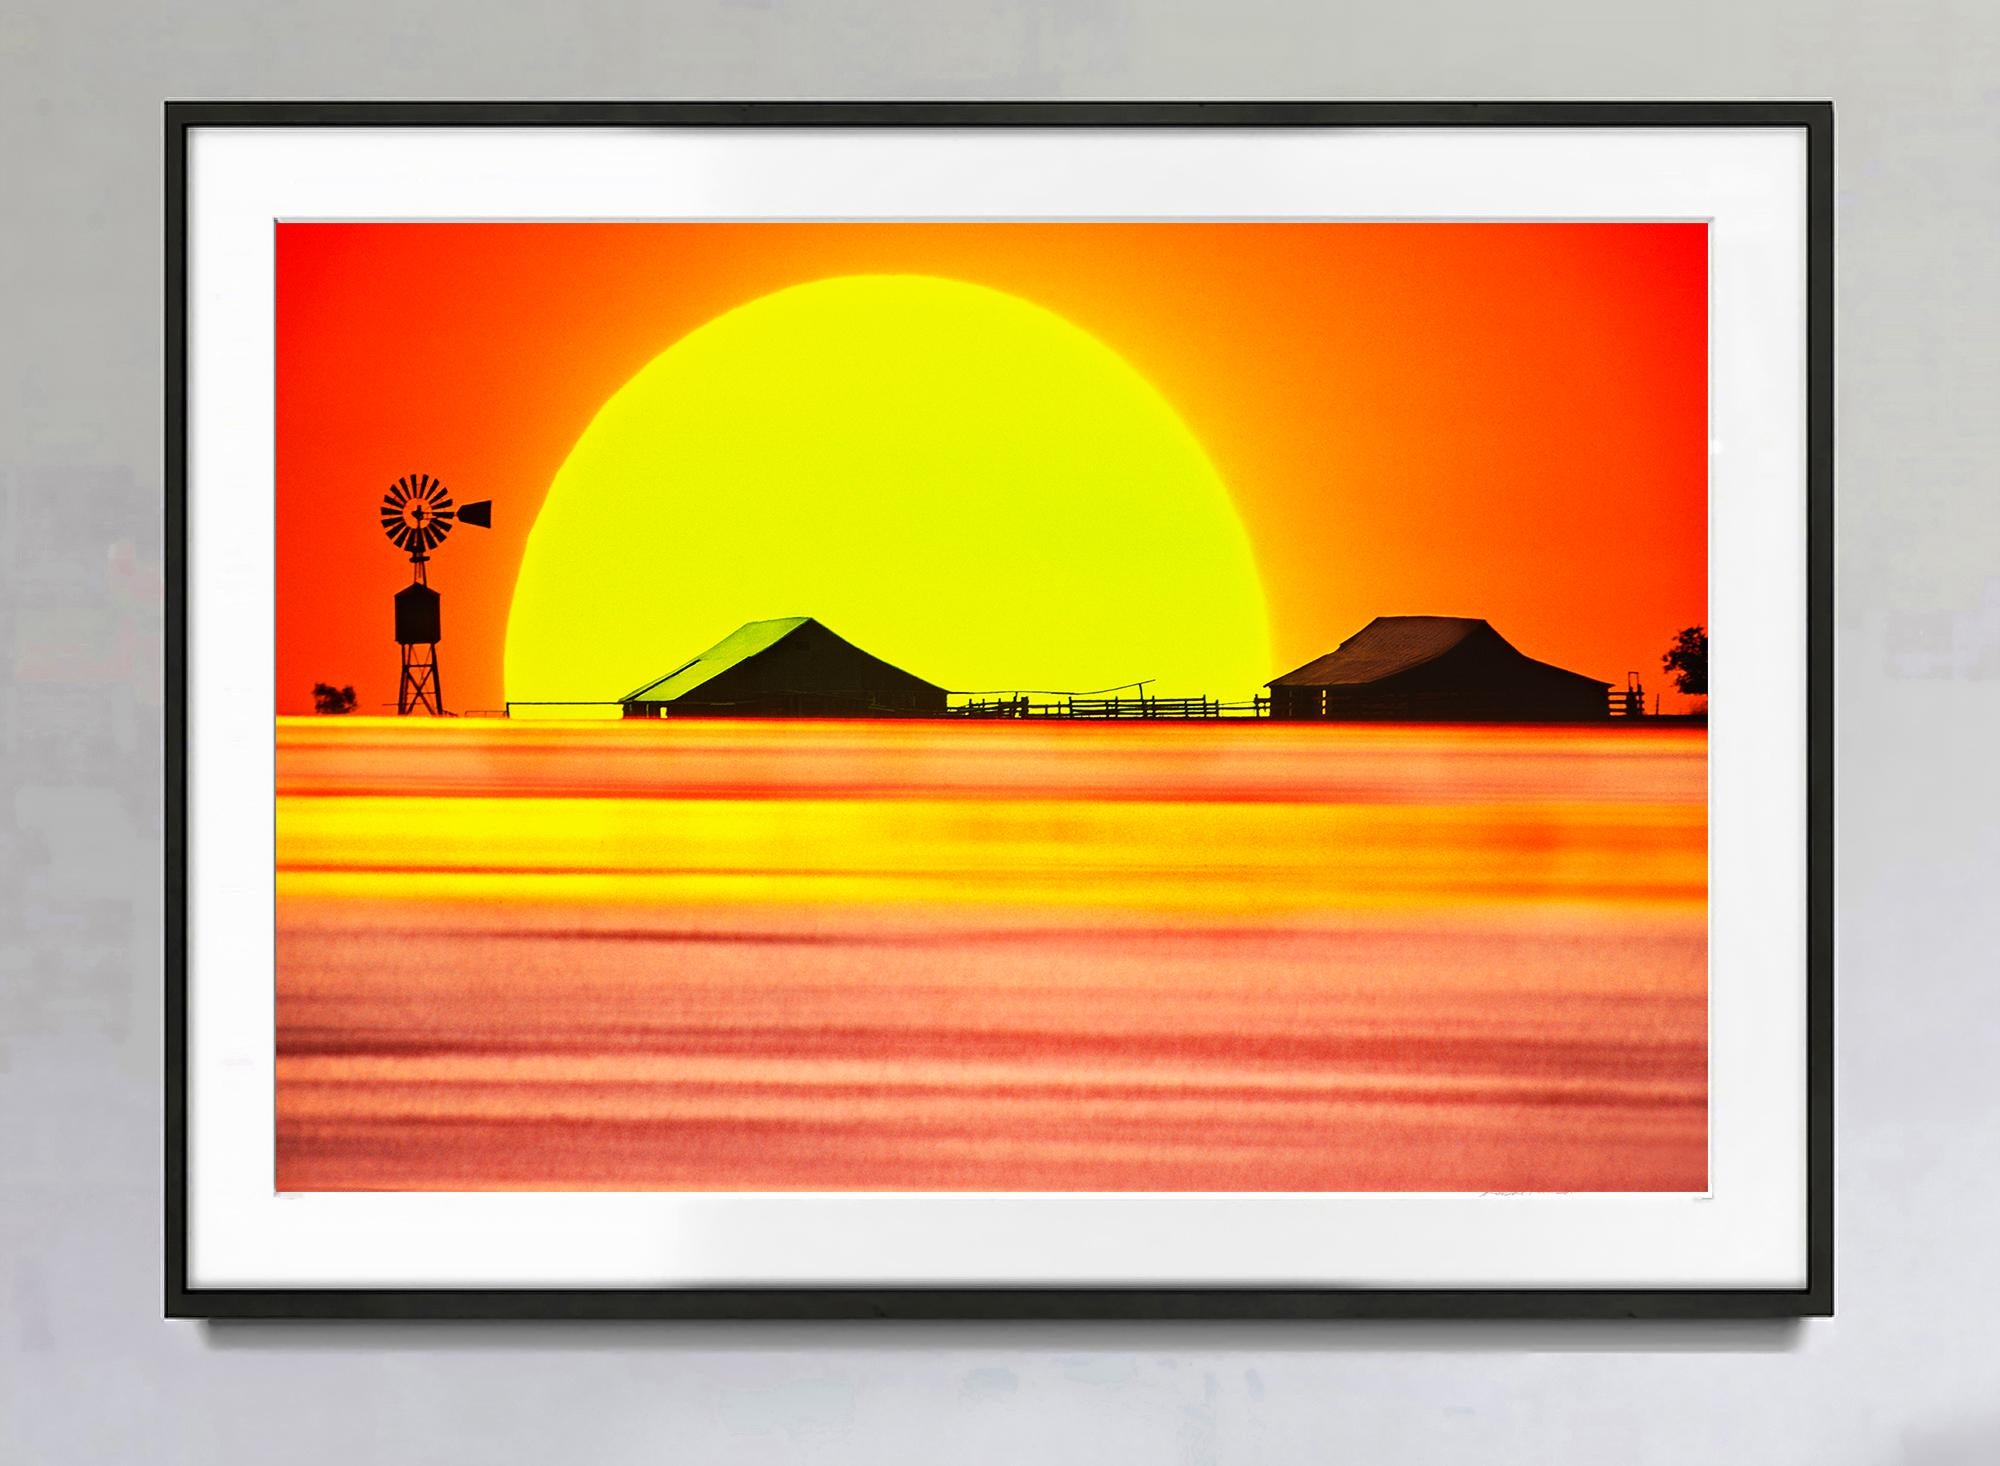 Dust bowl Texas Sunset with Dramatic Sky Windmill - Orange and Yellow landscape  - Photograph by Mitchell Funk